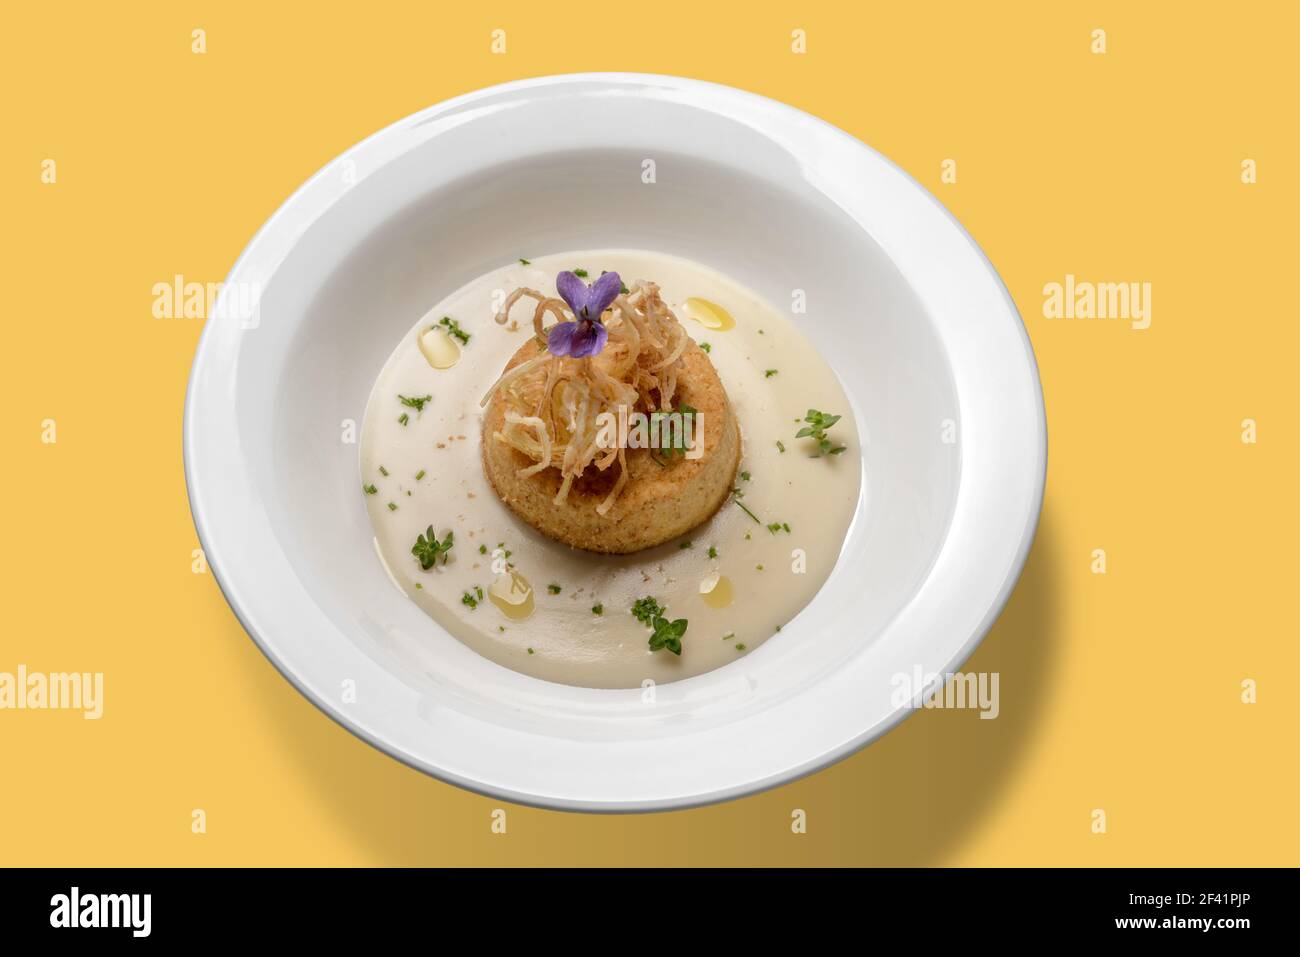 savory flan of leeks in cream cheese and olive oil, in white plate isolated on yellow background, top view Stock Photo